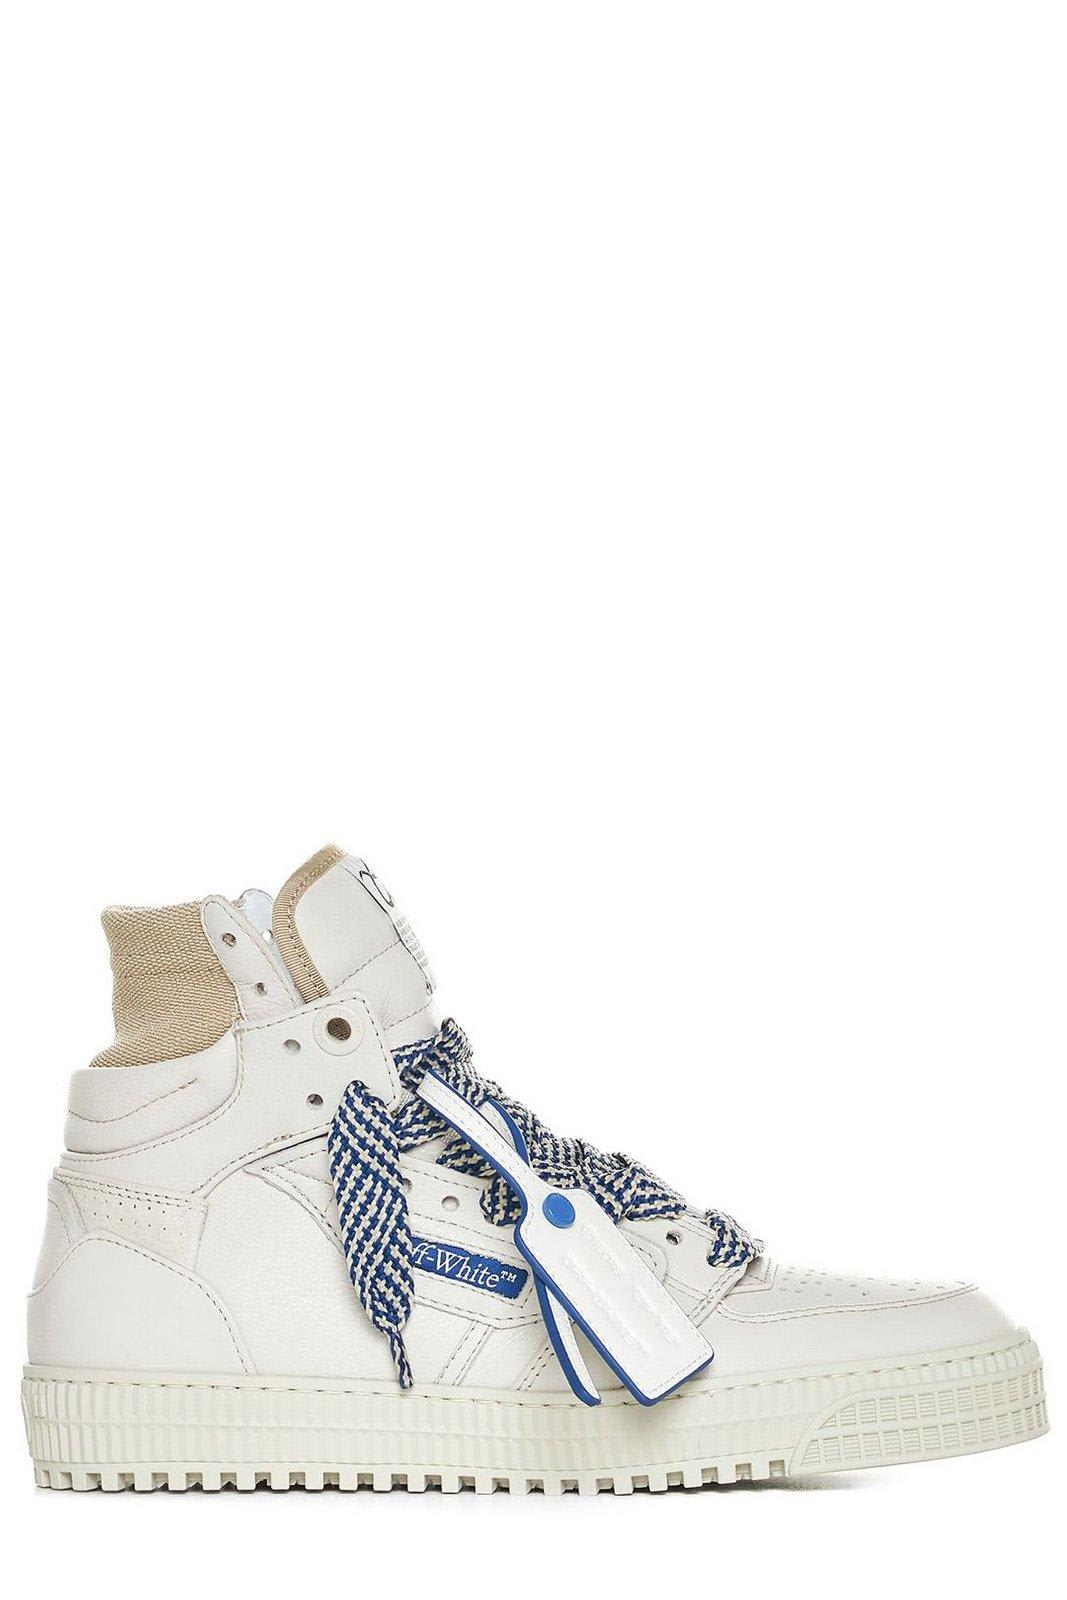 OFF-WHITE 3.0 OFF-COURT LACE-UP SNEAKERS